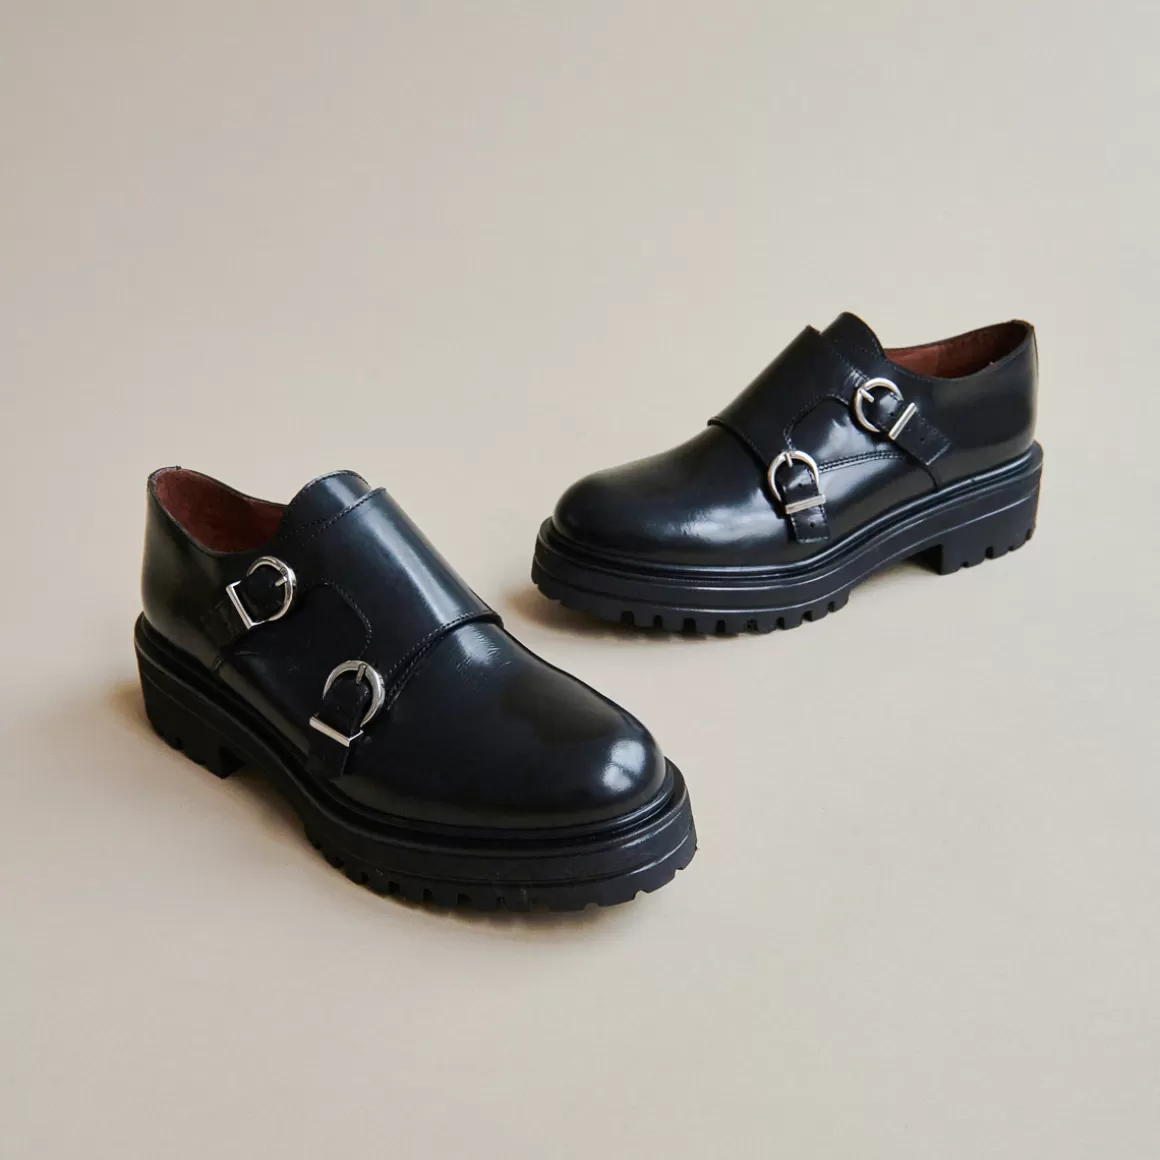 Derbies with double buckles and notched soles<Jonak Sale